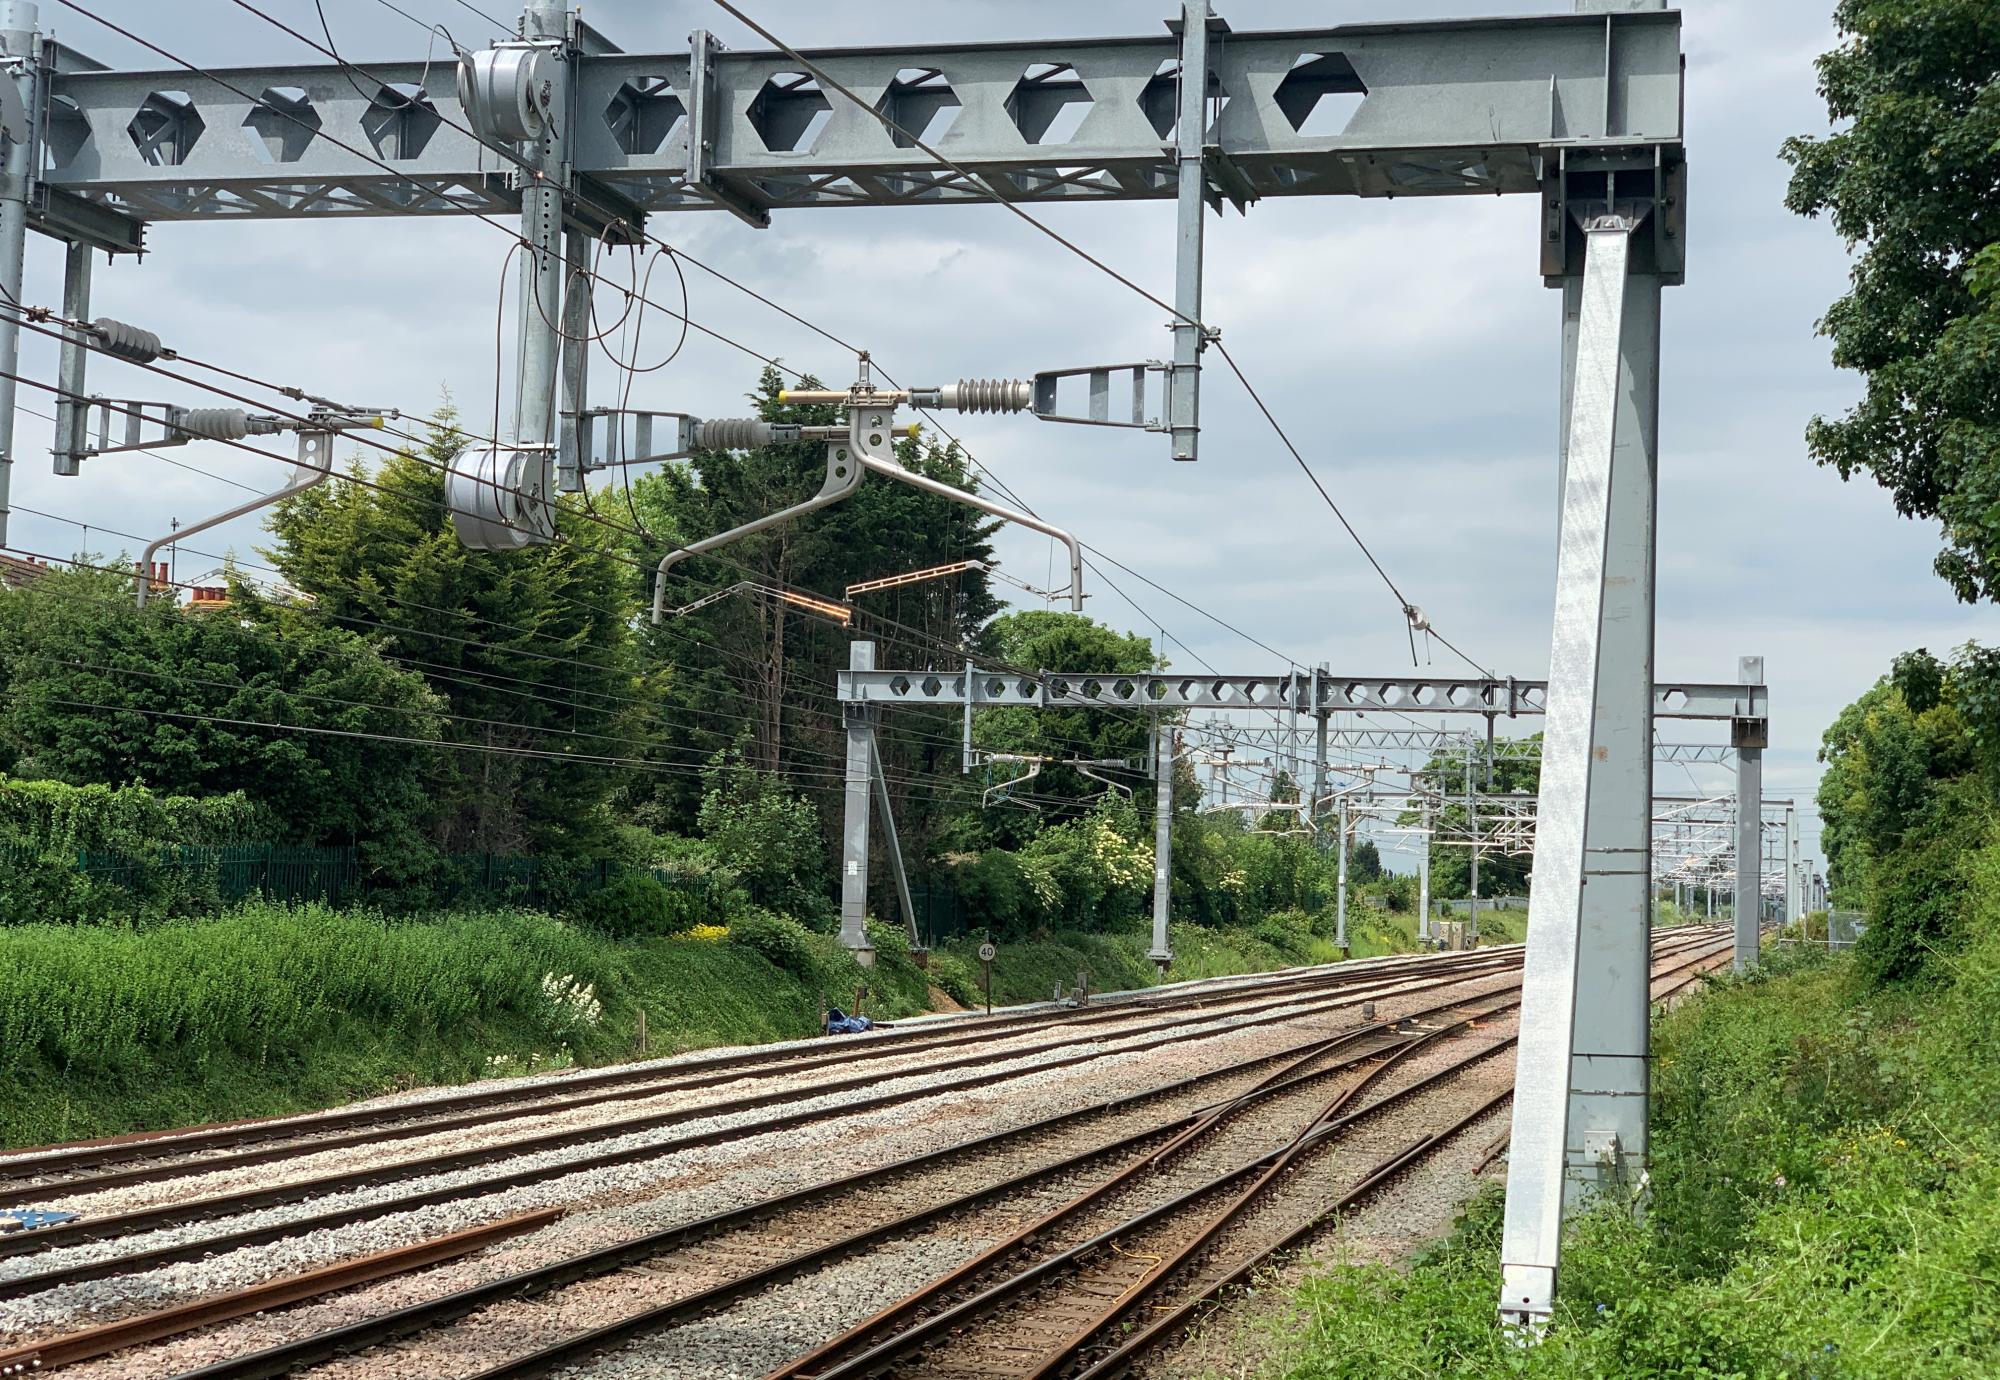 Midland Mainline Electrification continues with significant upgrades scheduled